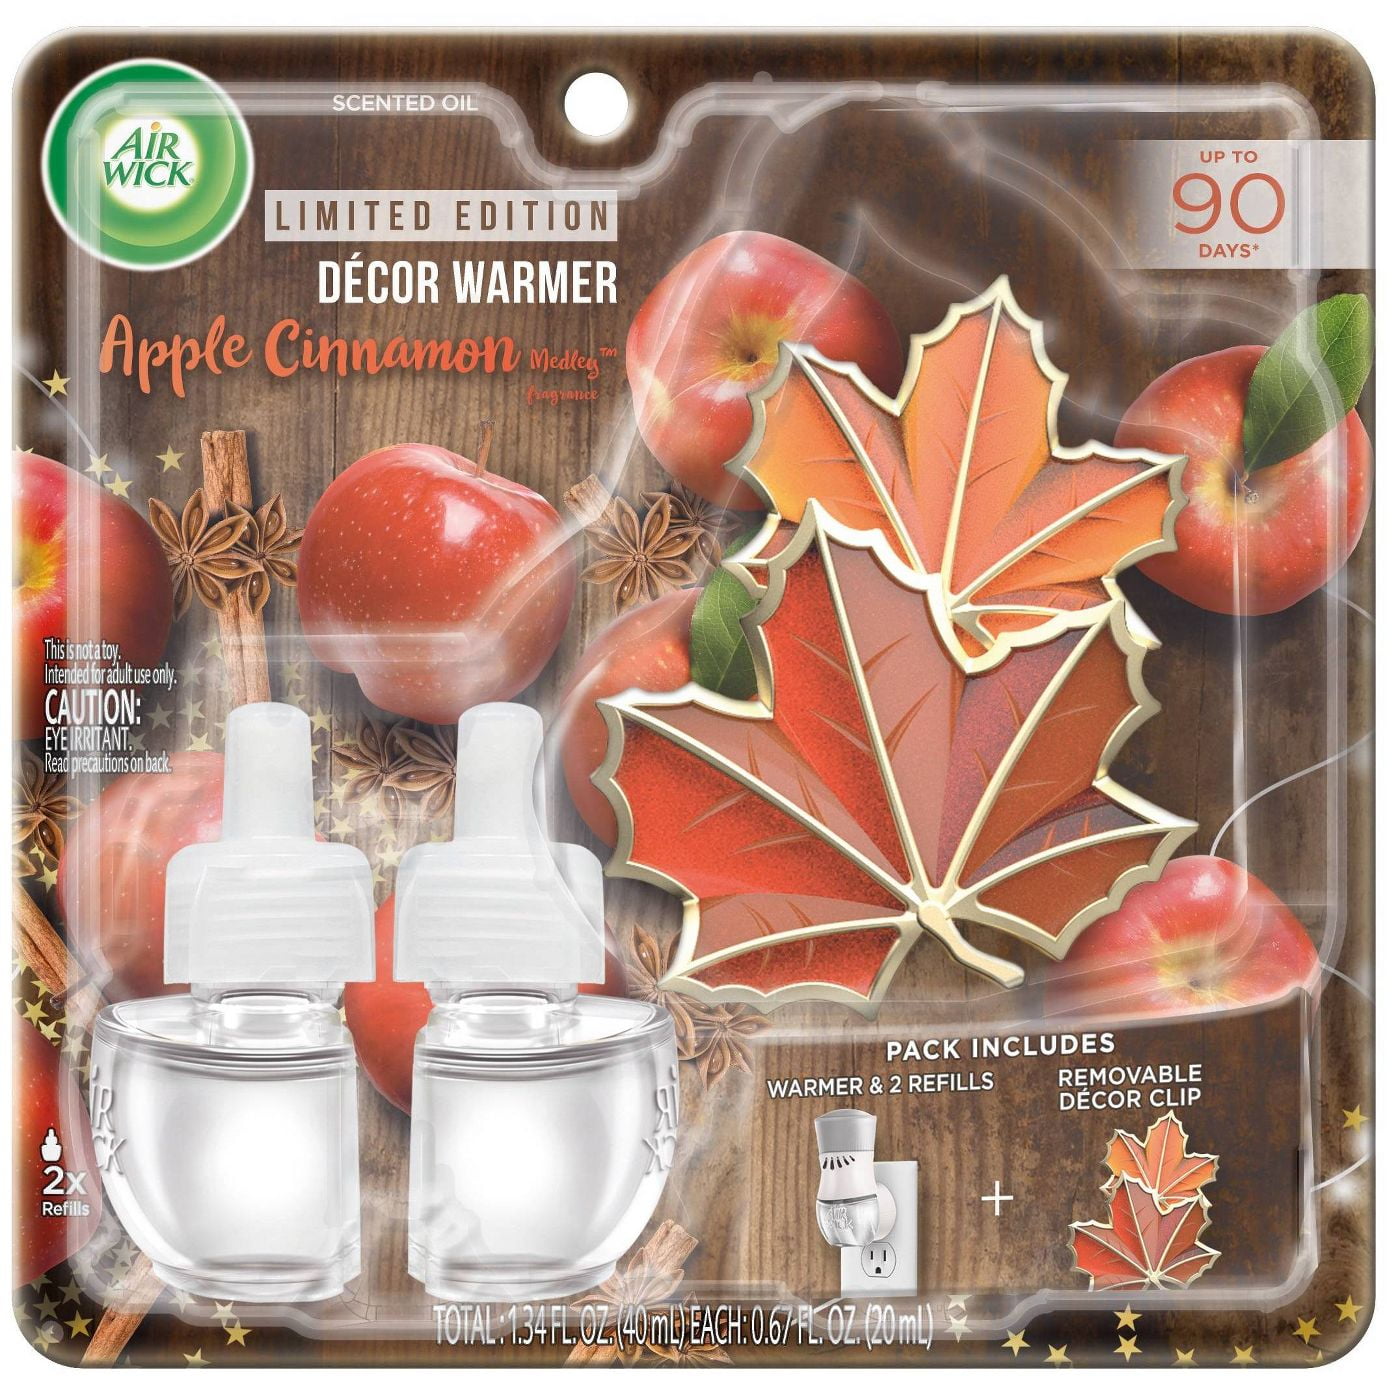 AIR WICK® Scented Oil - Apple Cinnamon Medley (Discontinued)